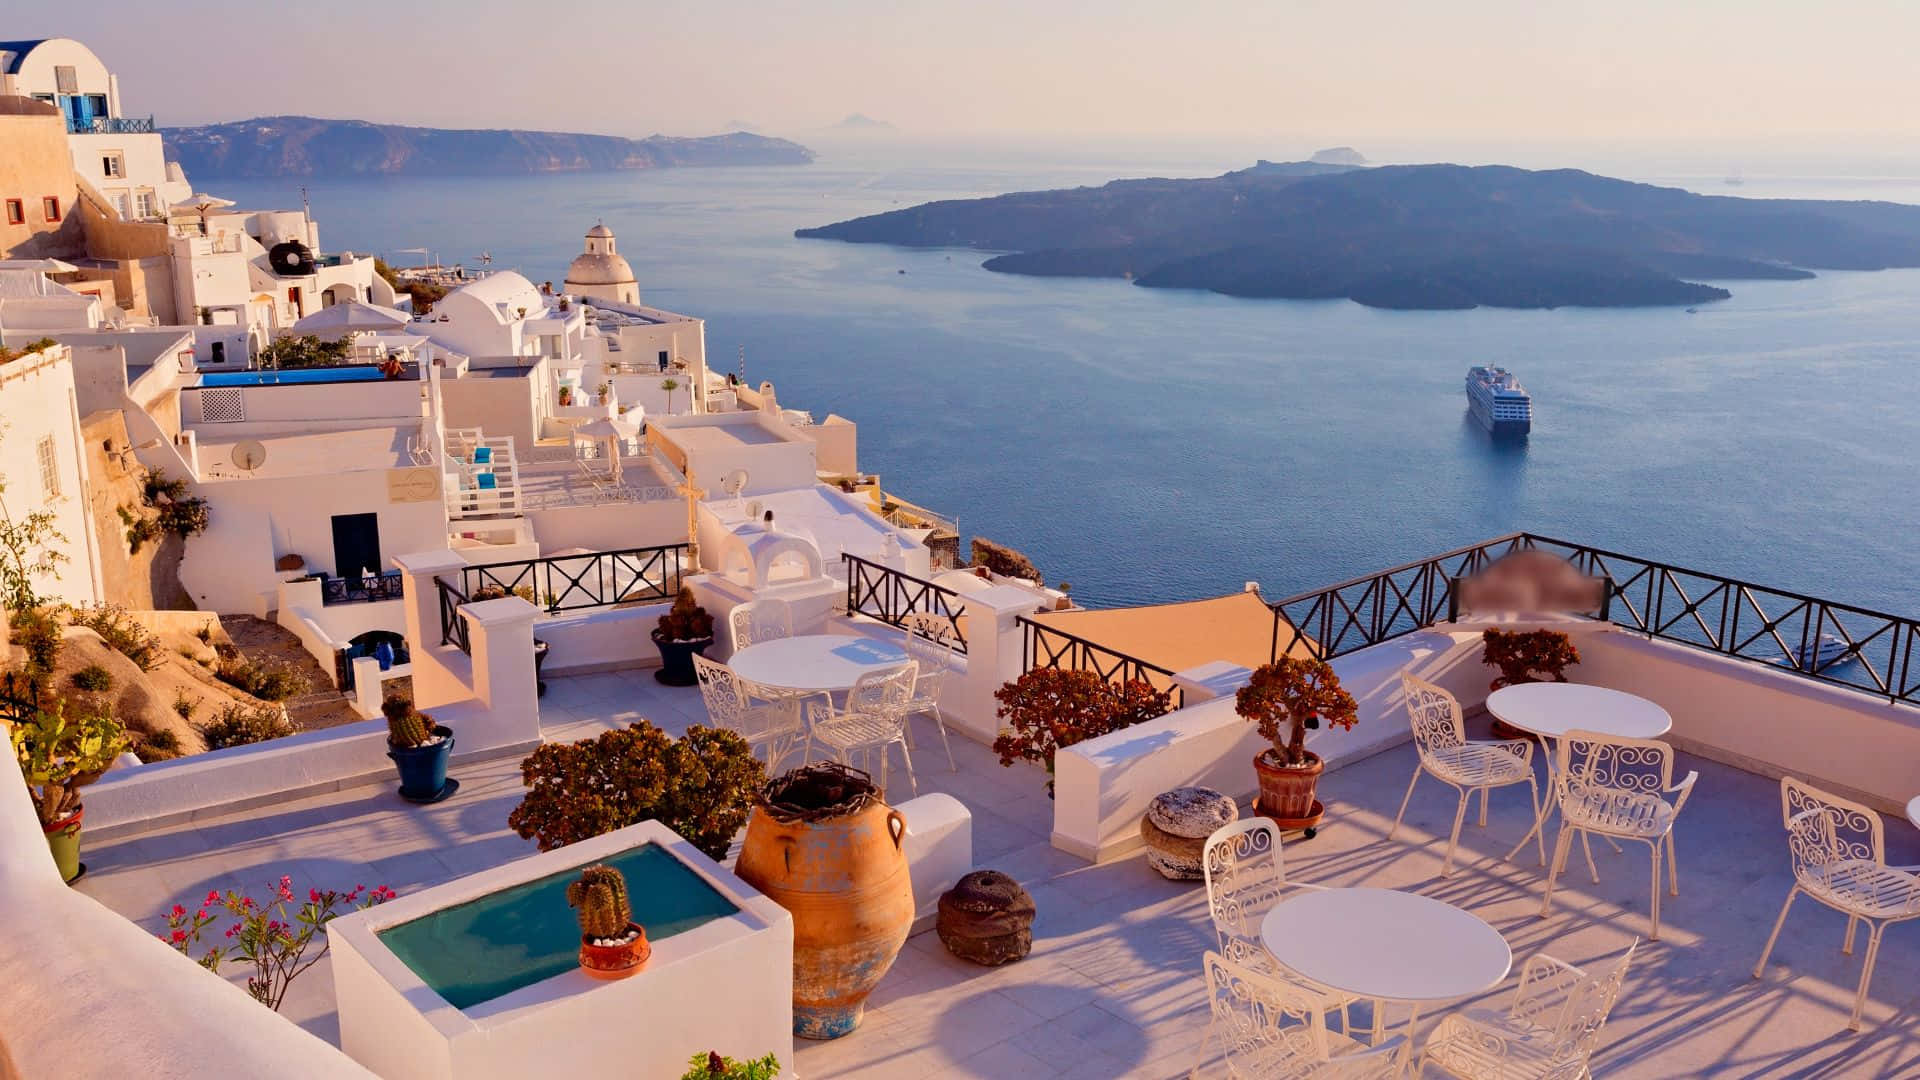 _ Enjoying the beauty of Greece's whitewashed homes and blue sea_